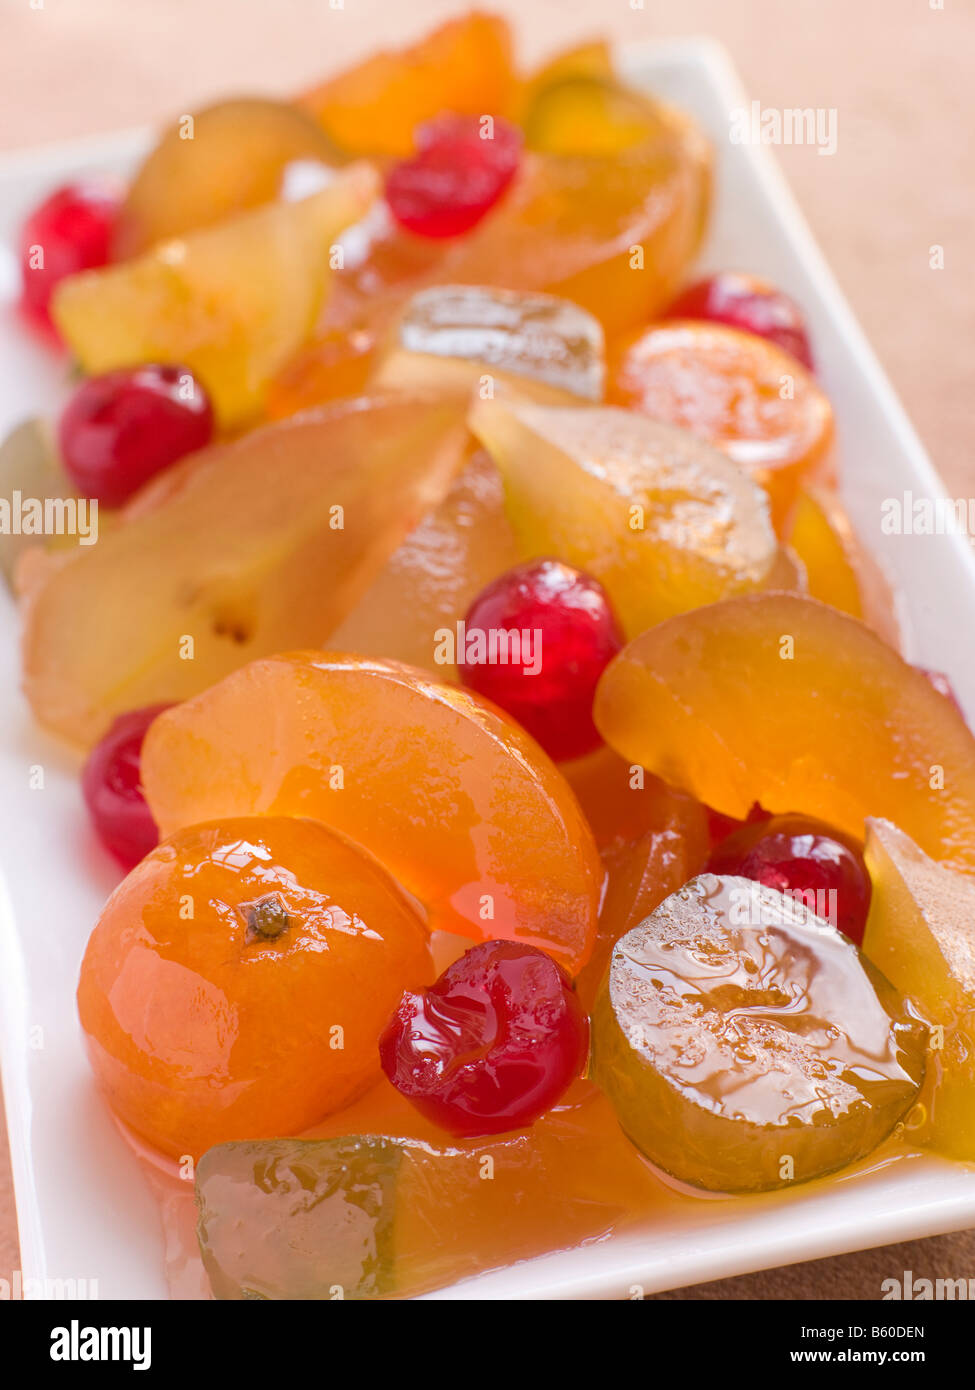 Plate of Mustard Fruits Stock Photo